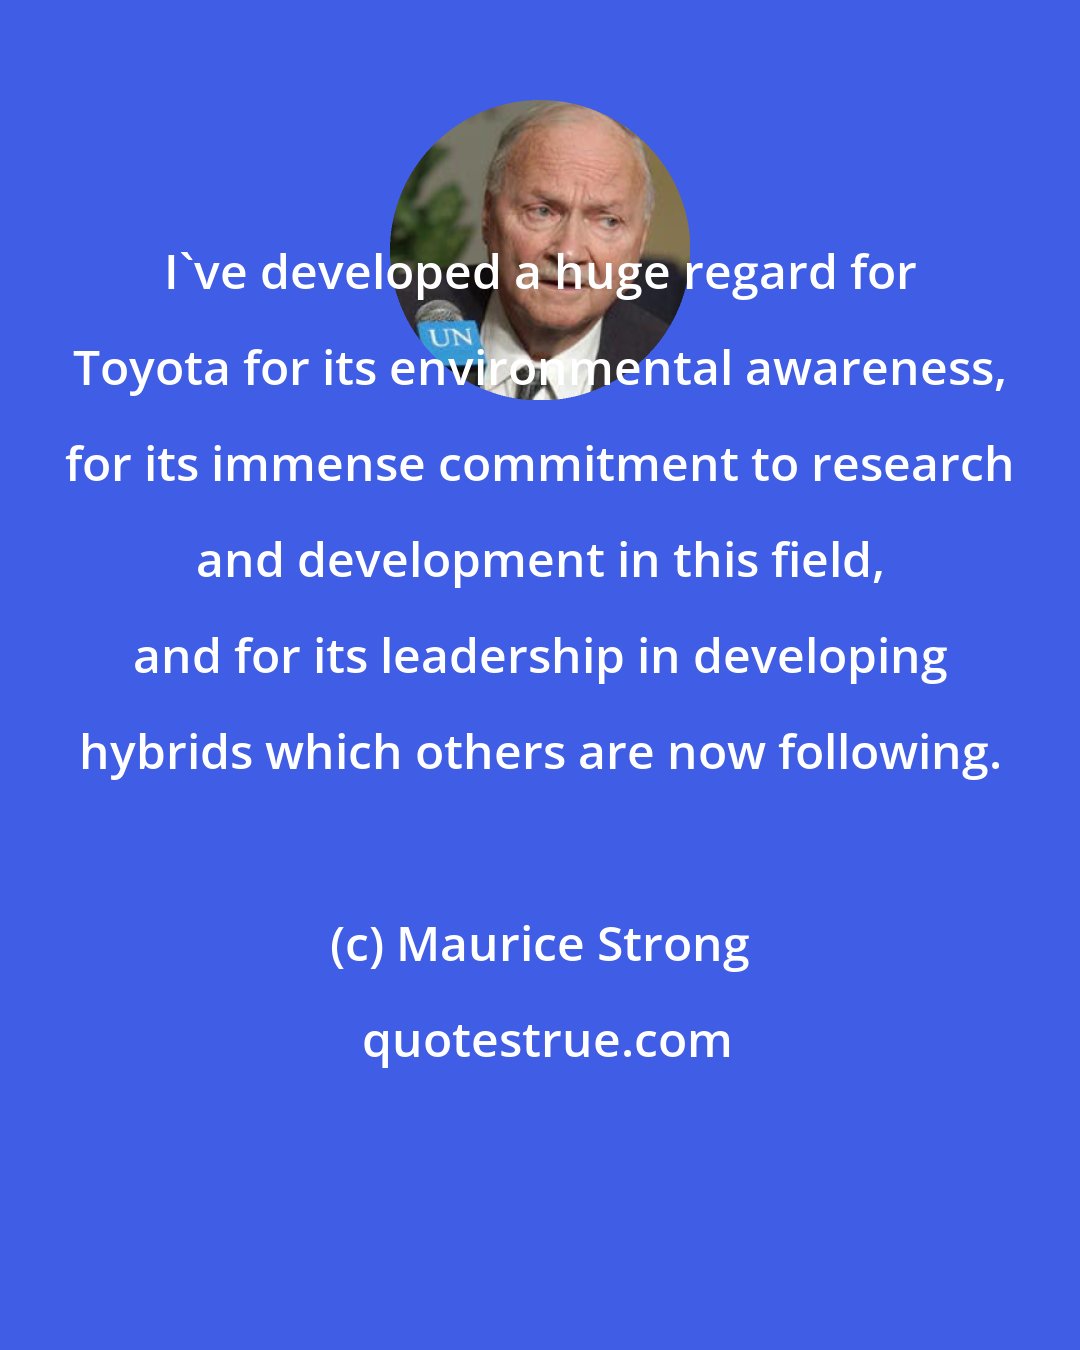 Maurice Strong: I've developed a huge regard for Toyota for its environmental awareness, for its immense commitment to research and development in this field, and for its leadership in developing hybrids which others are now following.